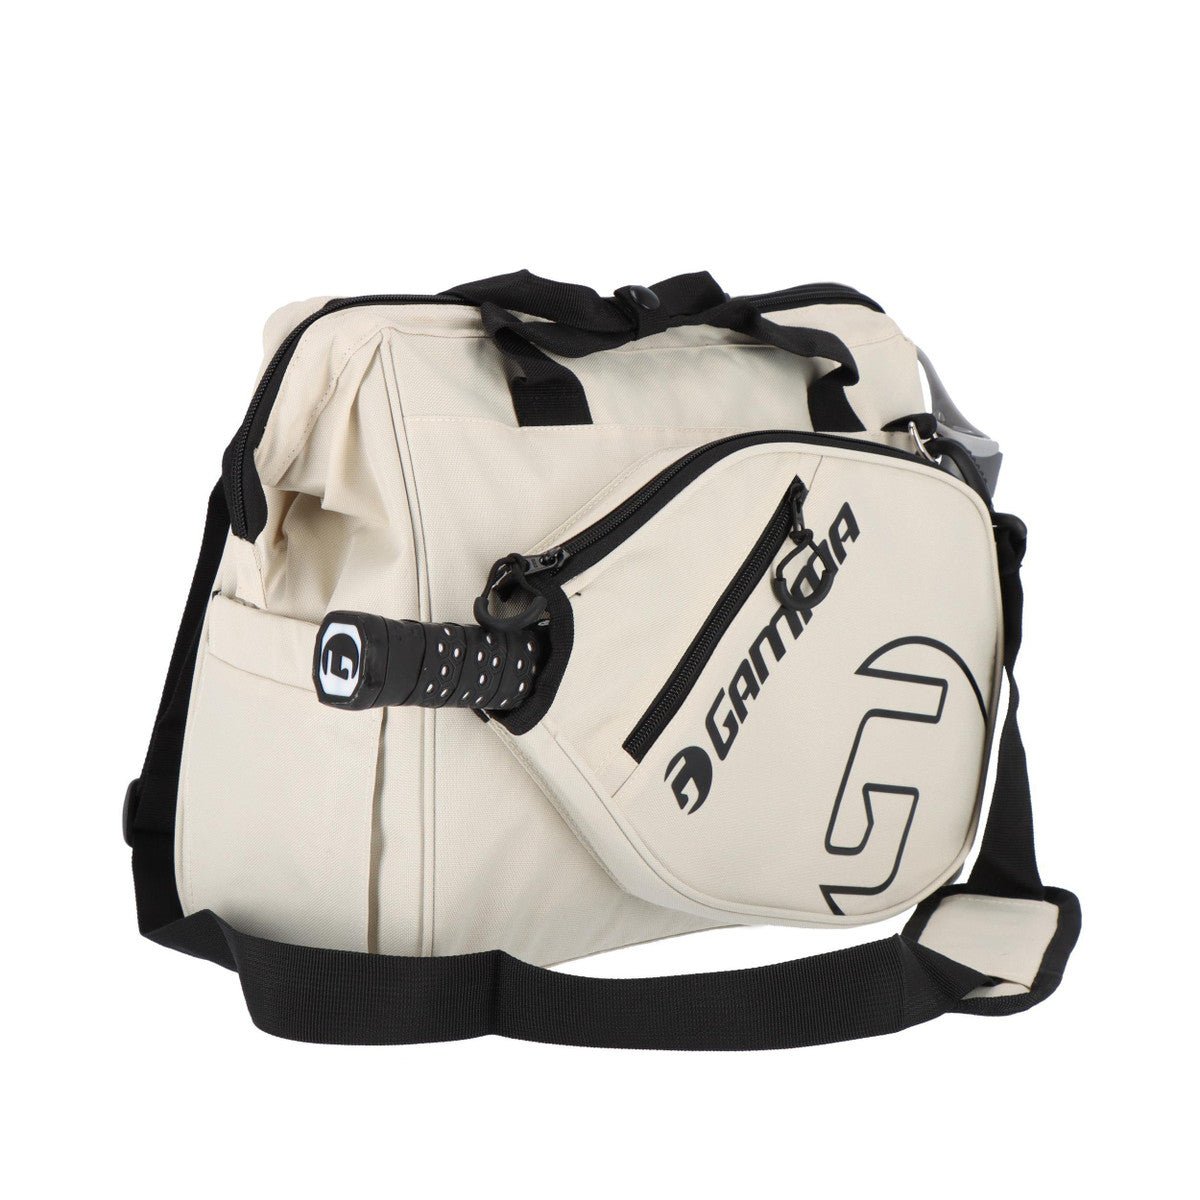 TOUR TOTE BAG - Grip On Golf & Pickleball Zone